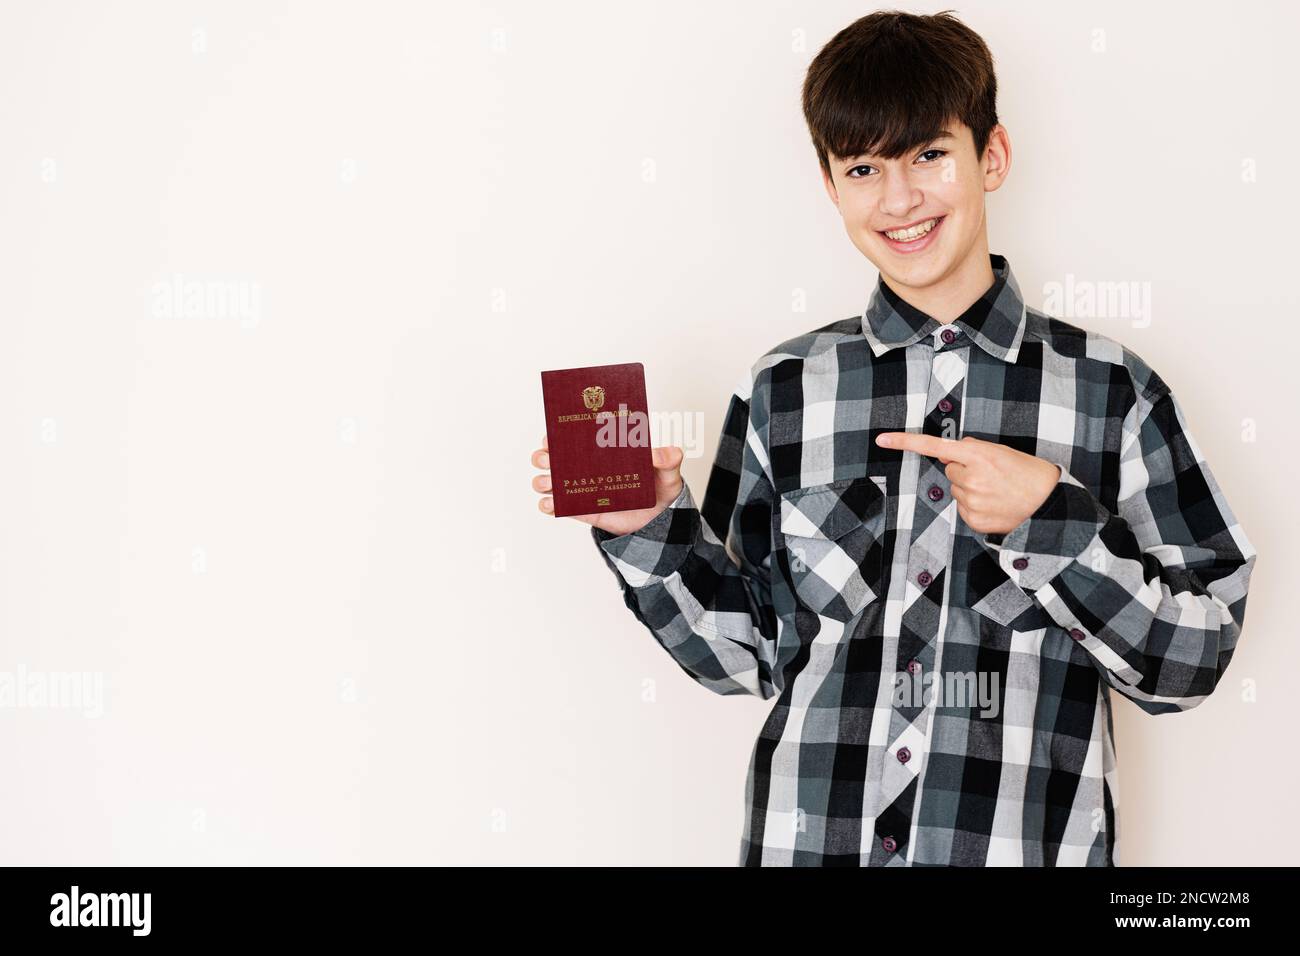 Young teenager boy holding Colombia passport looking positive and happy standing and smiling with a confident smile against white background. Stock Photo